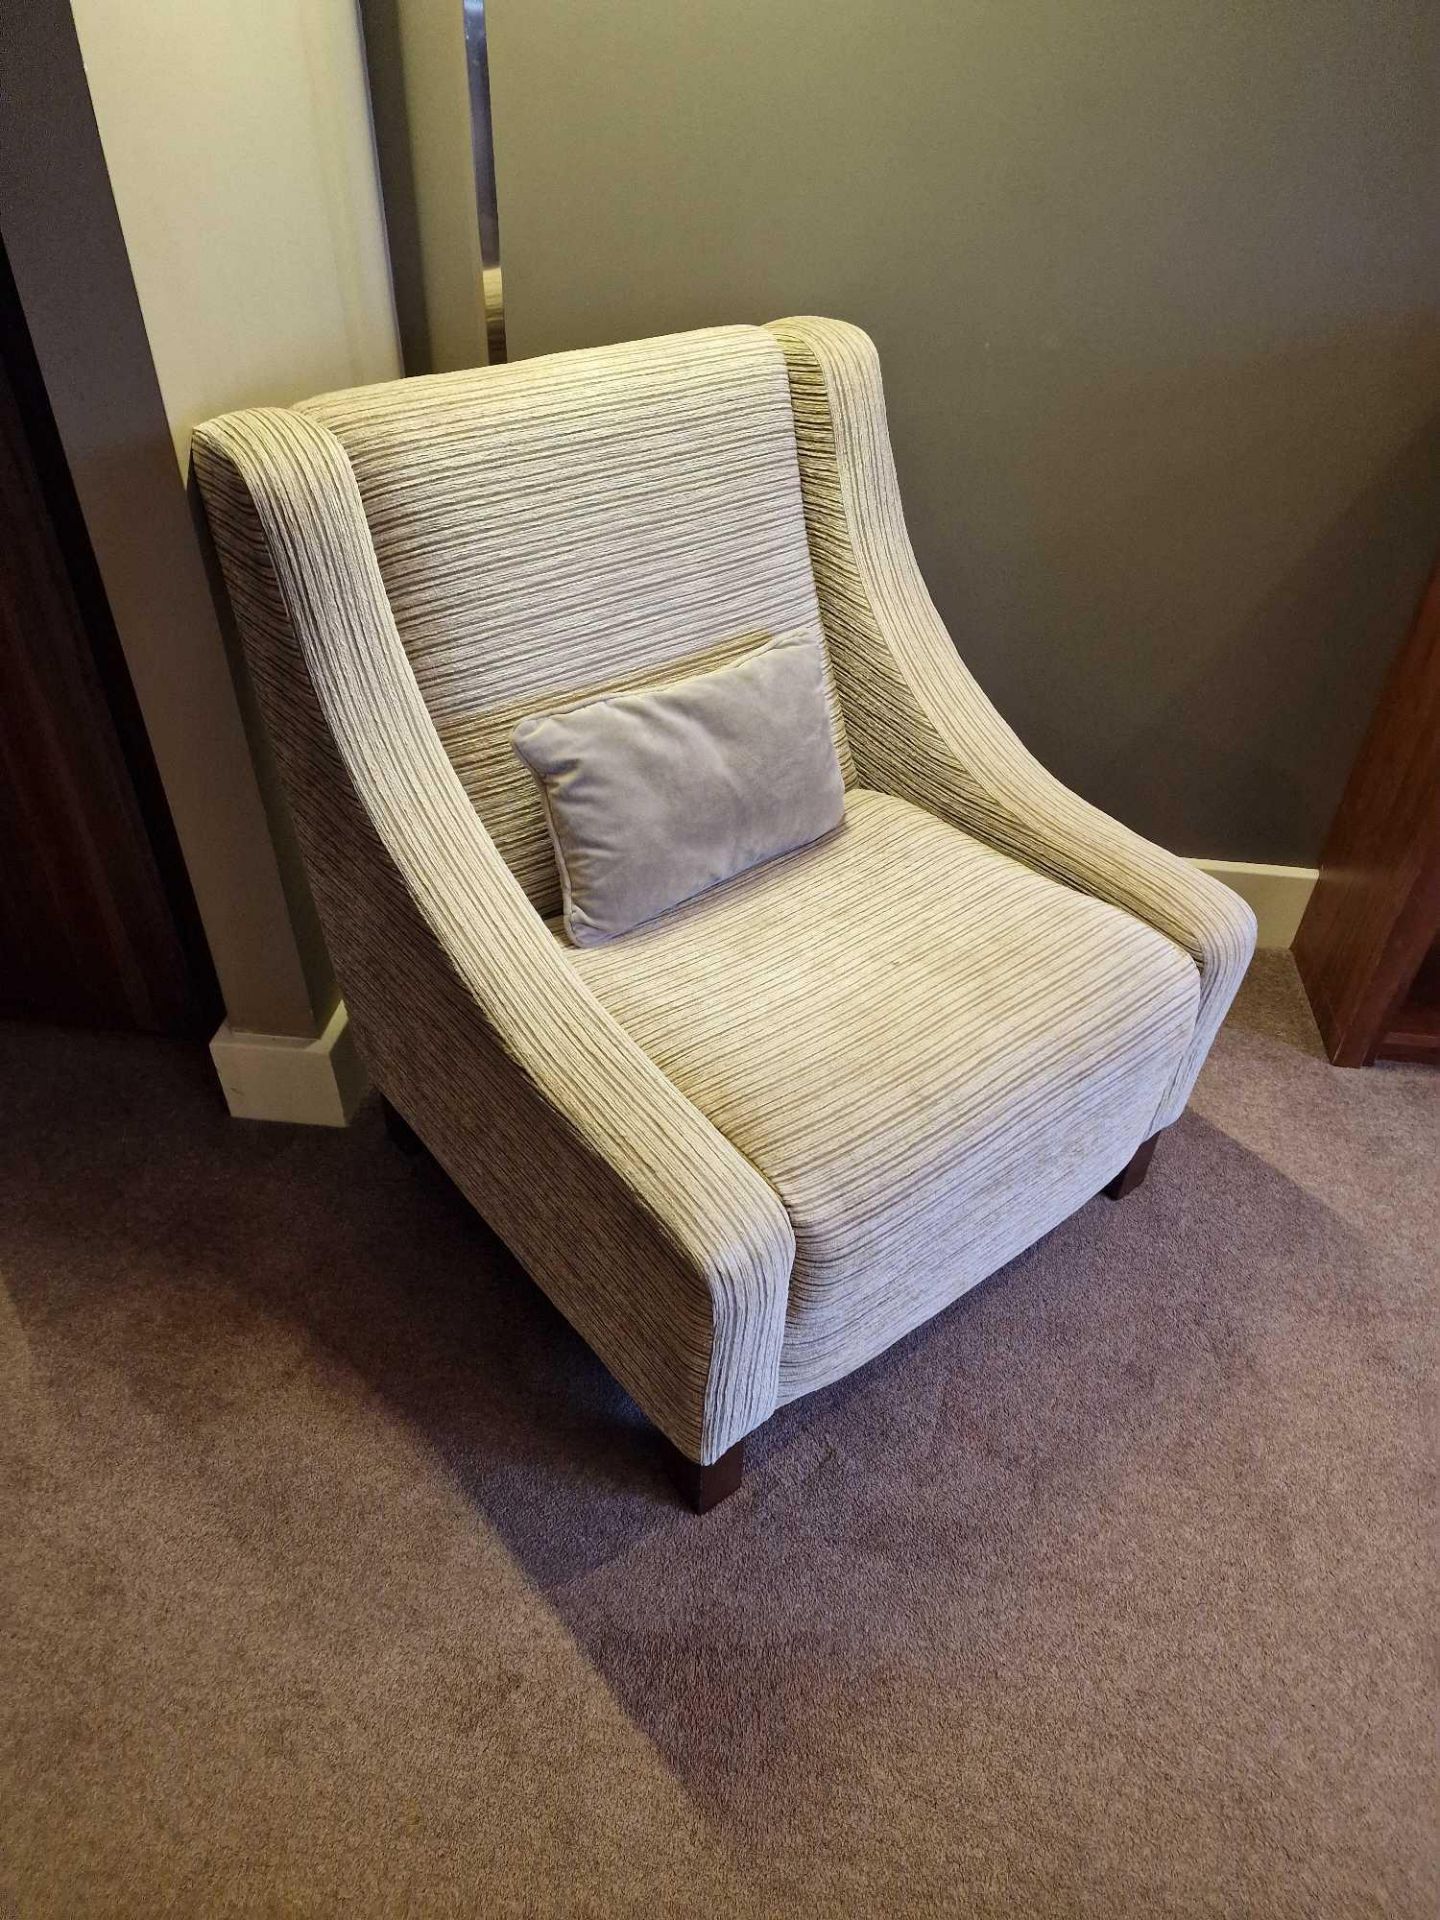 An upholstered relaxer chair 78 x 54 x 86cm ( Location : 229)